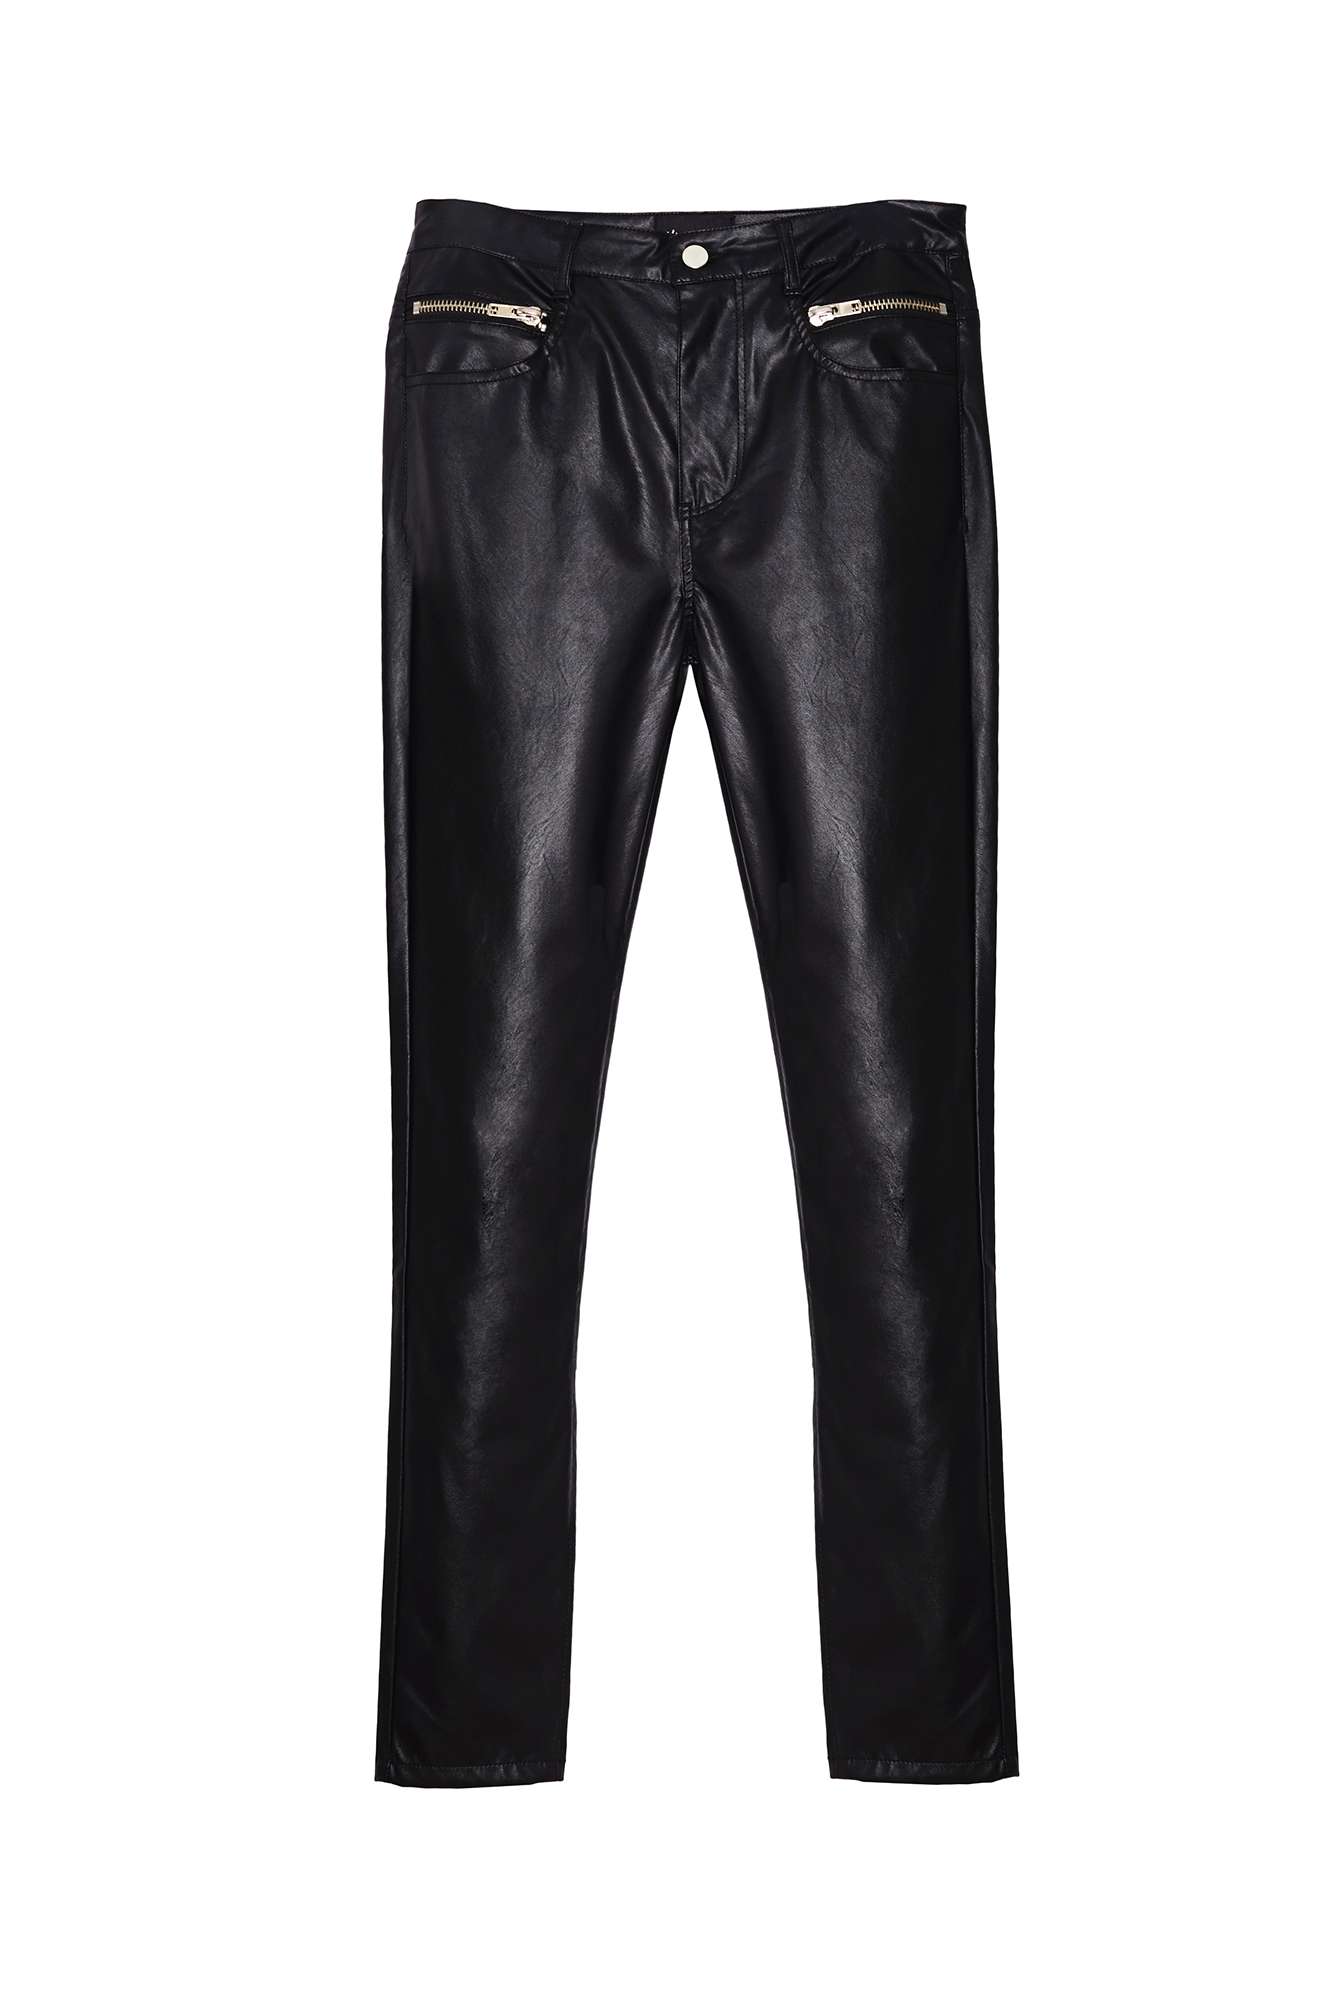 Lyst - Nasty Gal Bad Attitude Faux Leather Pants in Black